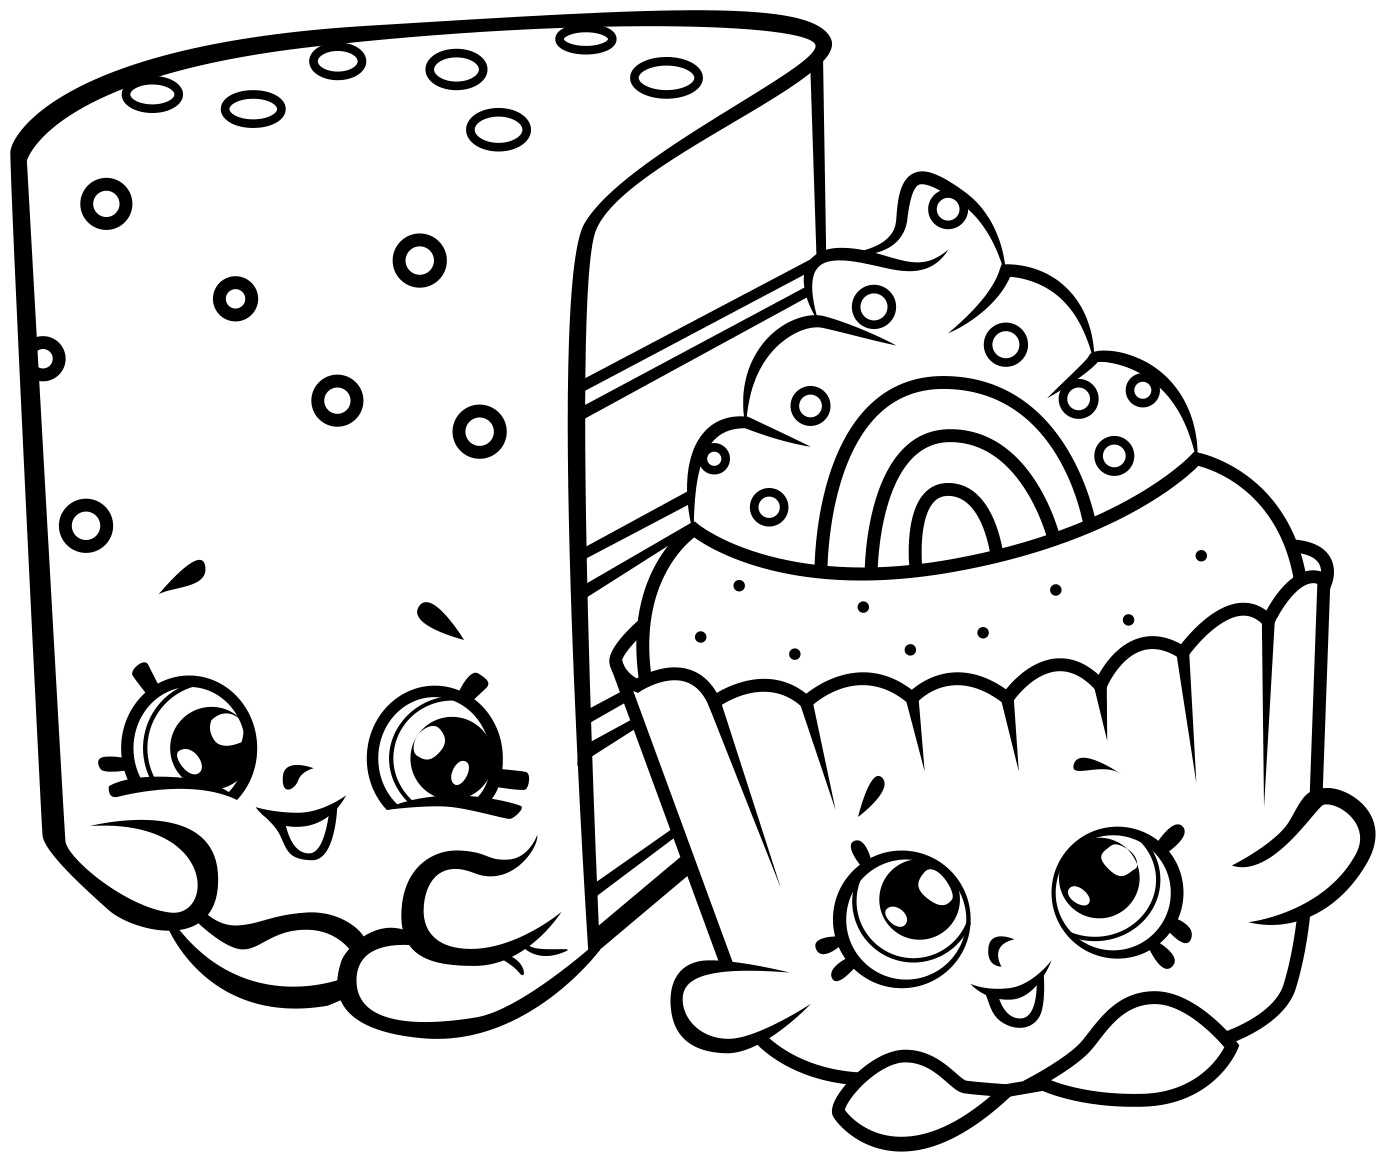 Www Shopkins Coloring Pages at GetColorings.com | Free ...